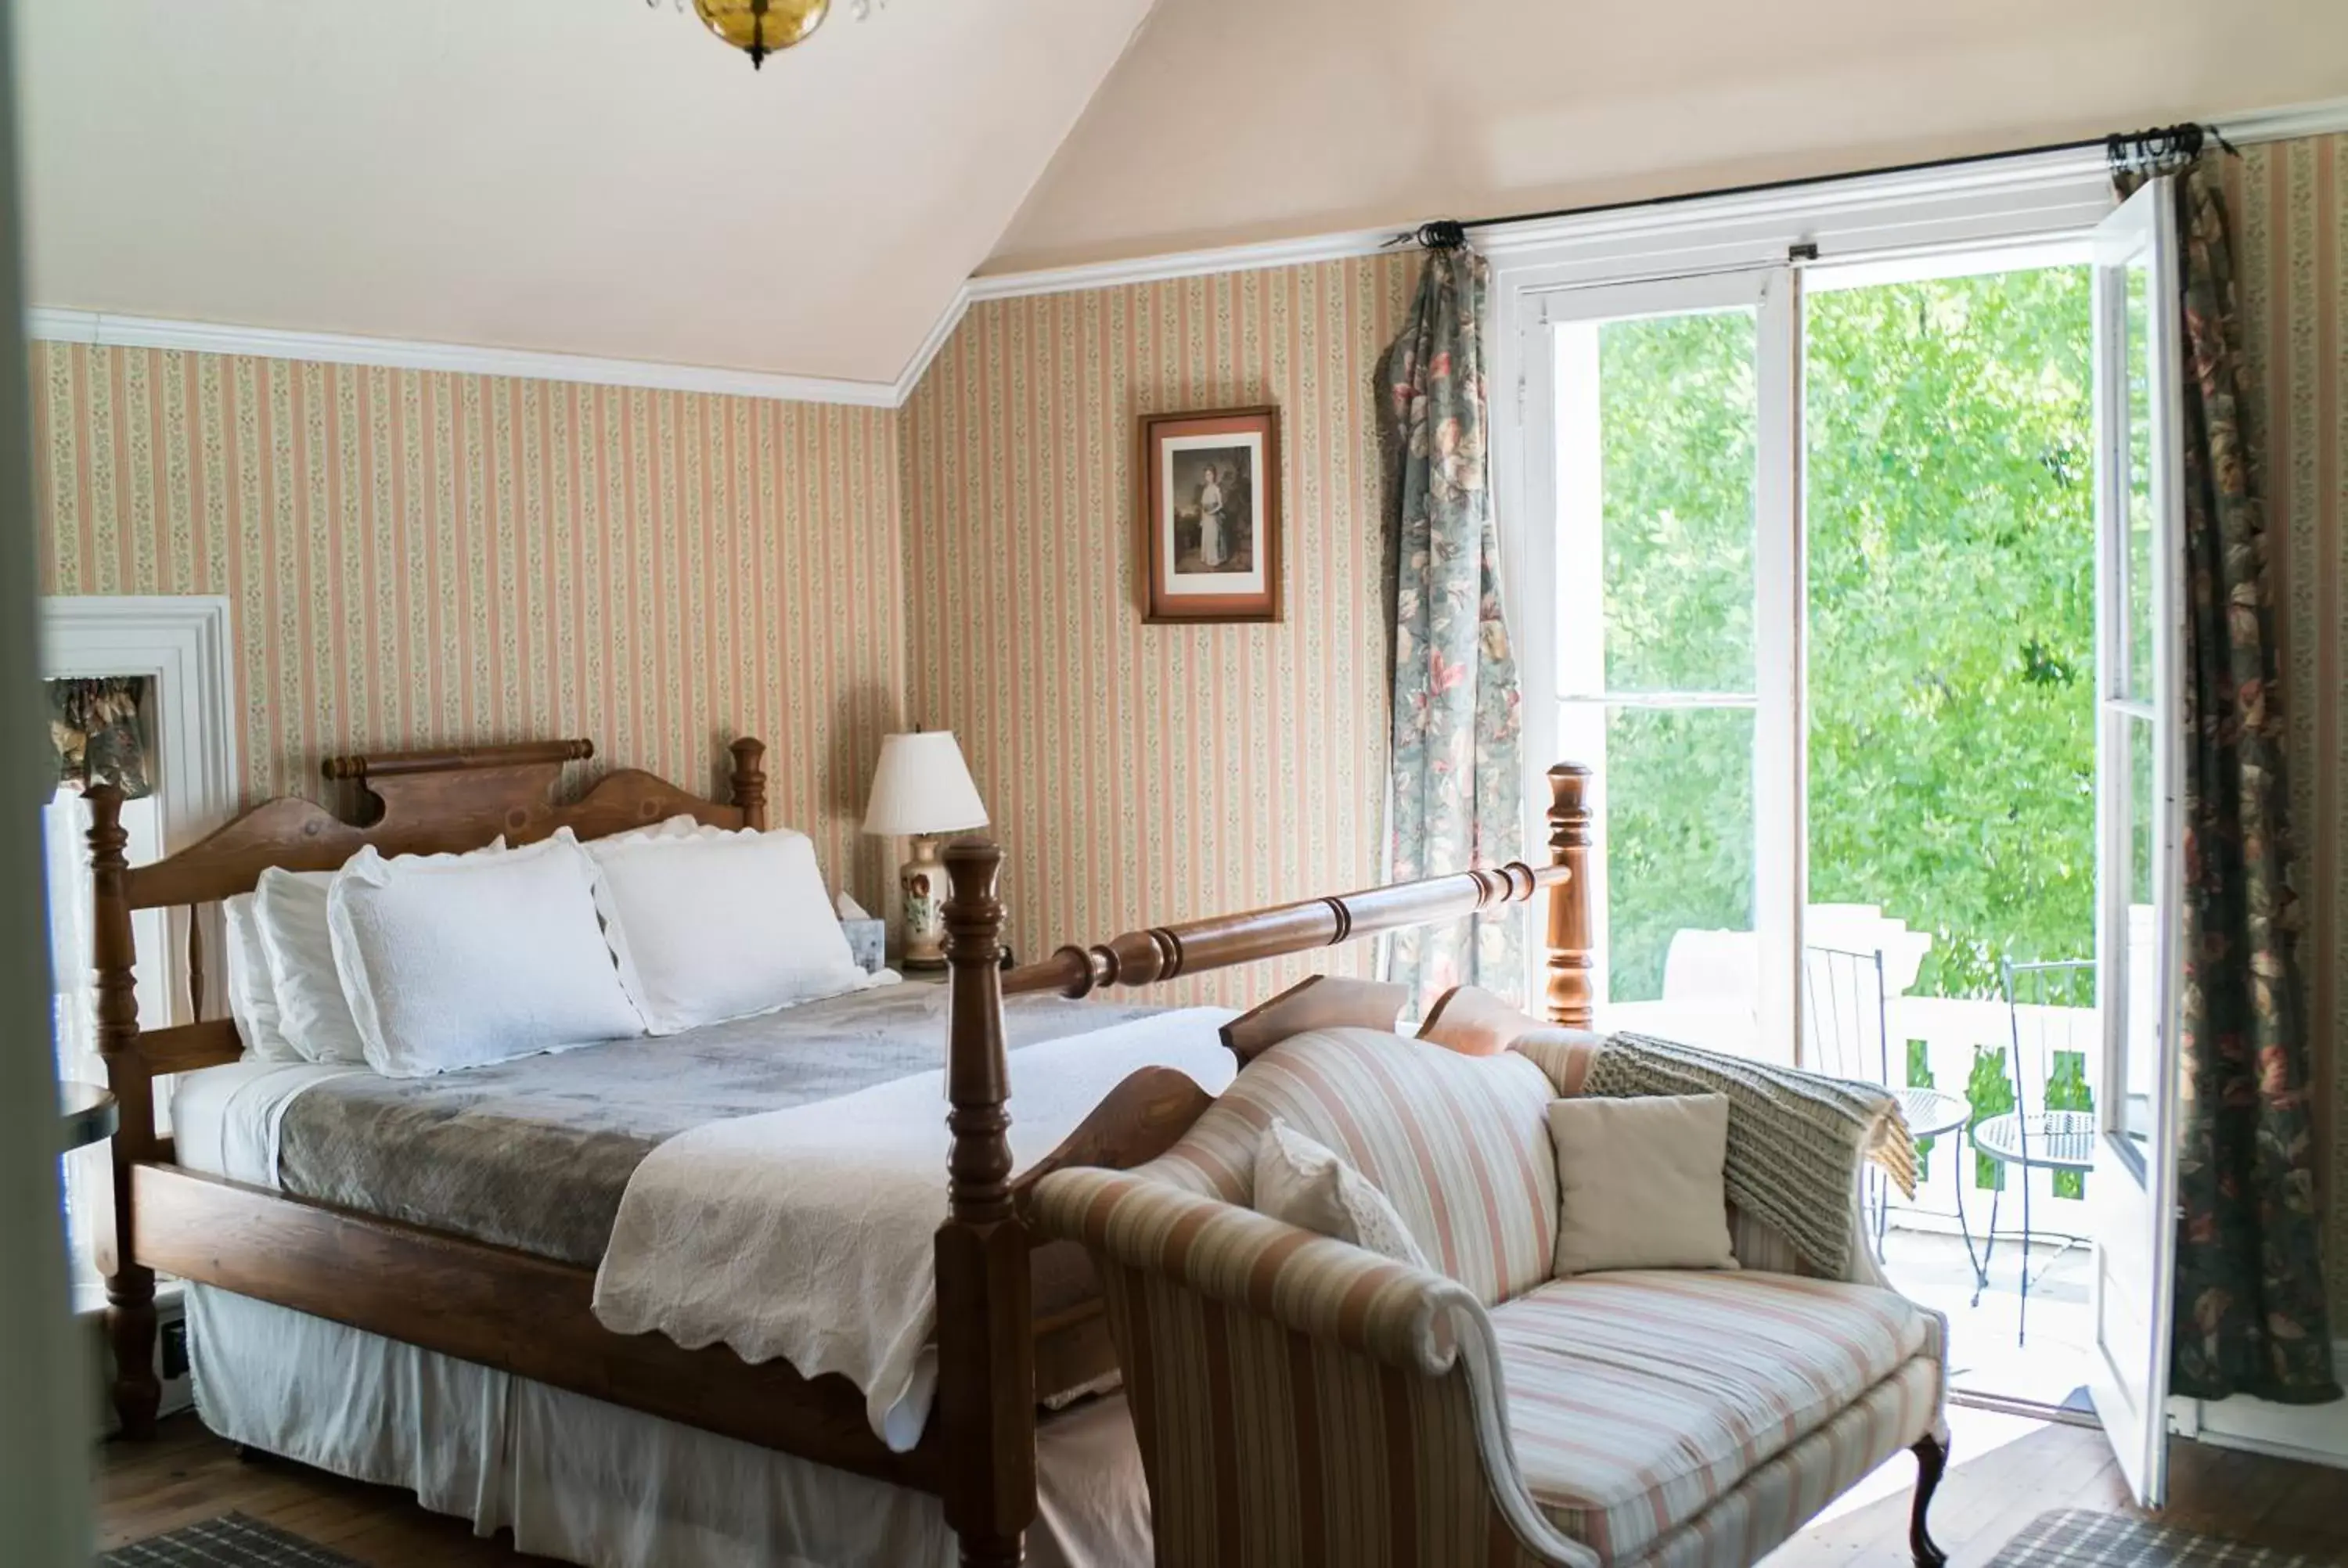 Bedroom in The Mulberry Inn -An Historic Bed and Breakfast